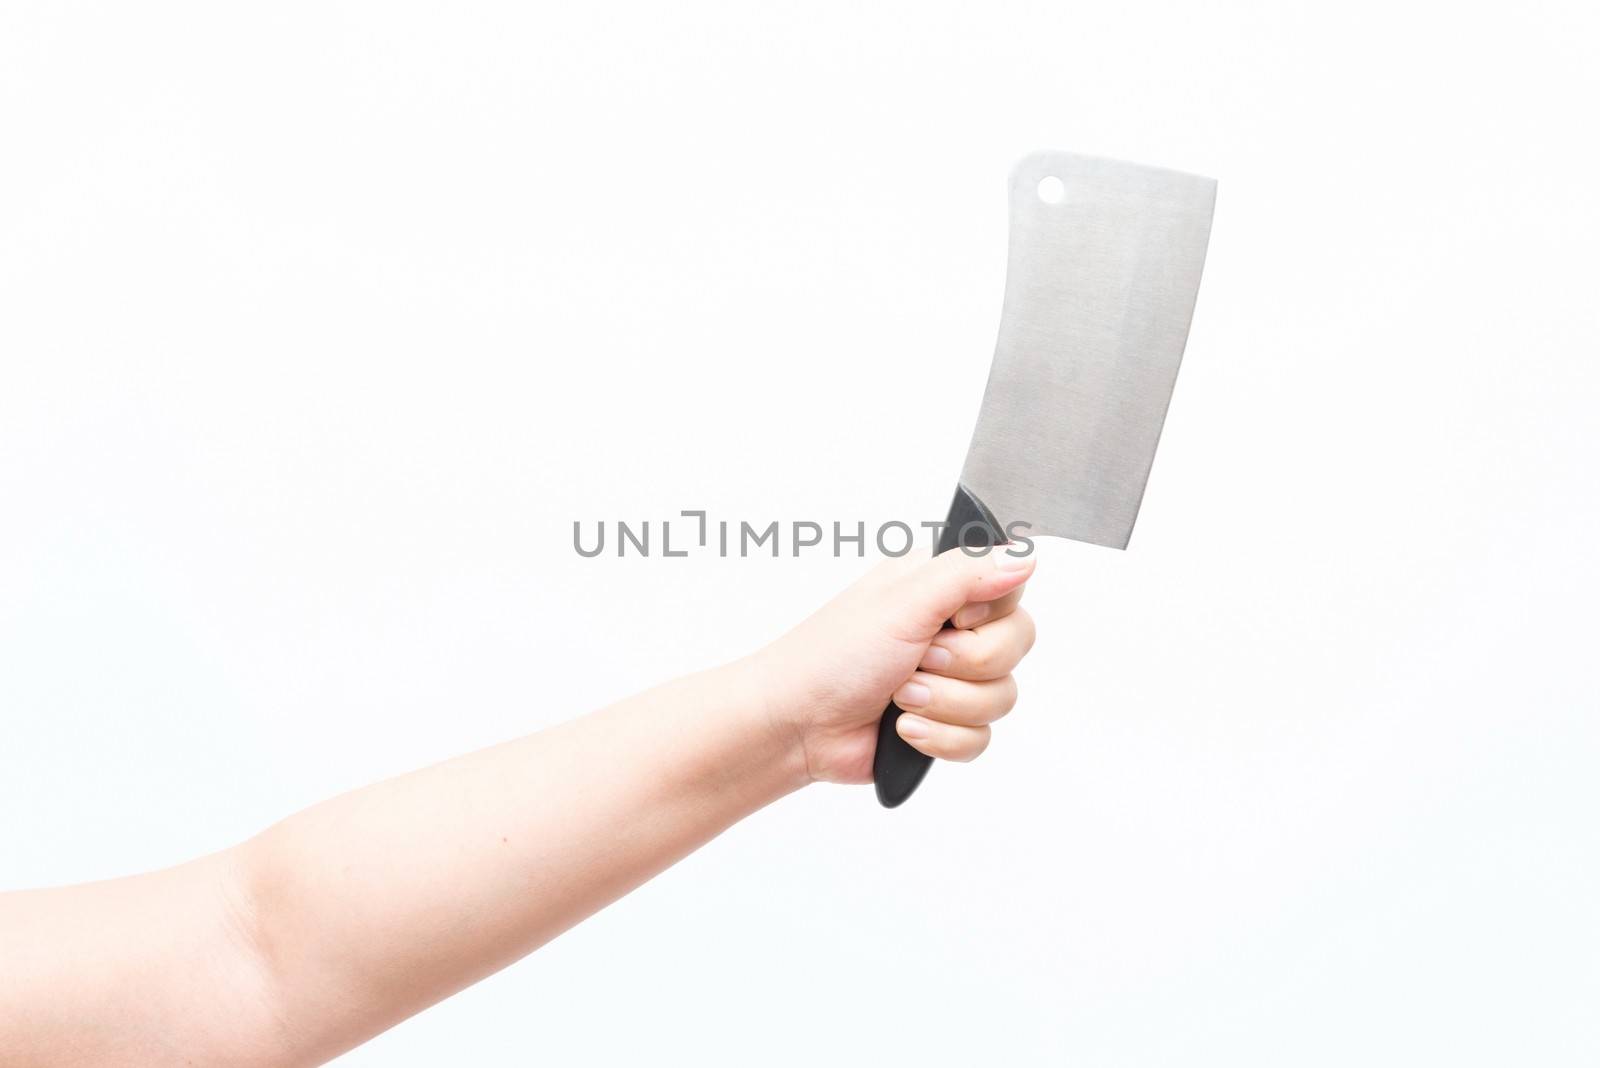 Asian woman holding large knife, isolated